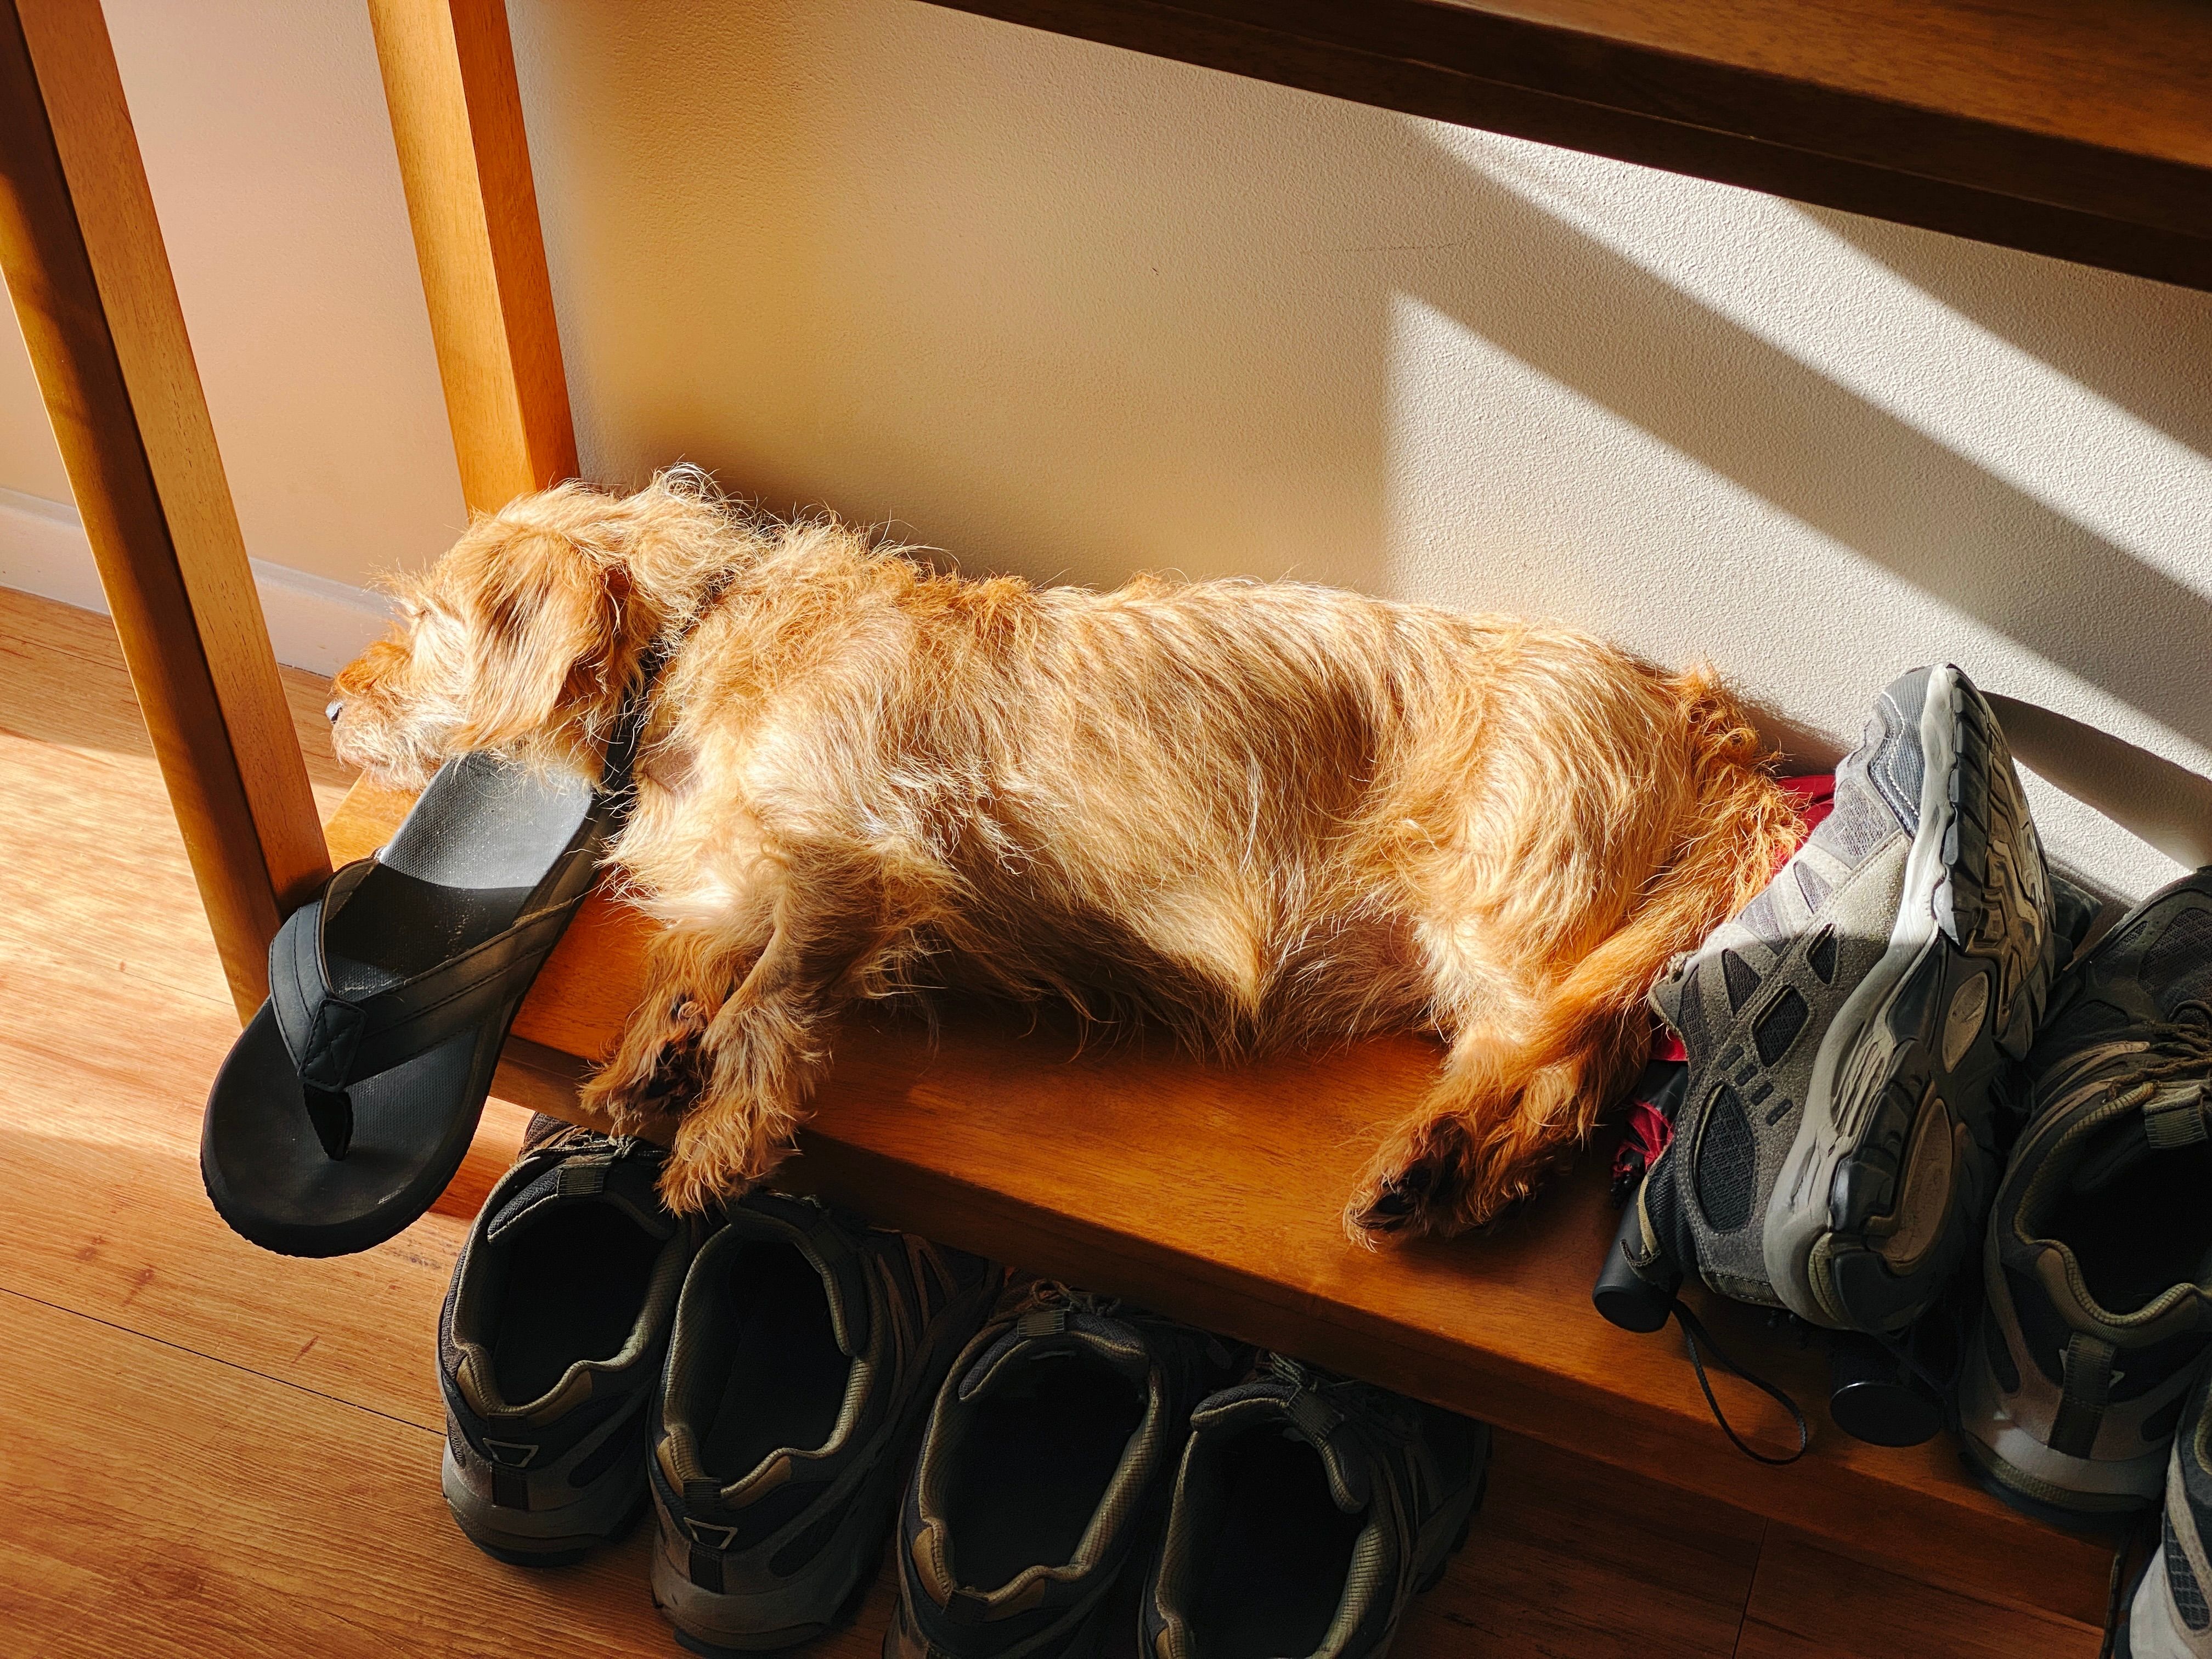 A photo of a small scruffy blonde dog lying on his side on the bottom self of a side table, with sun pouring in on him. His butt is jammed against a shoe, and his head is resting against a thong.